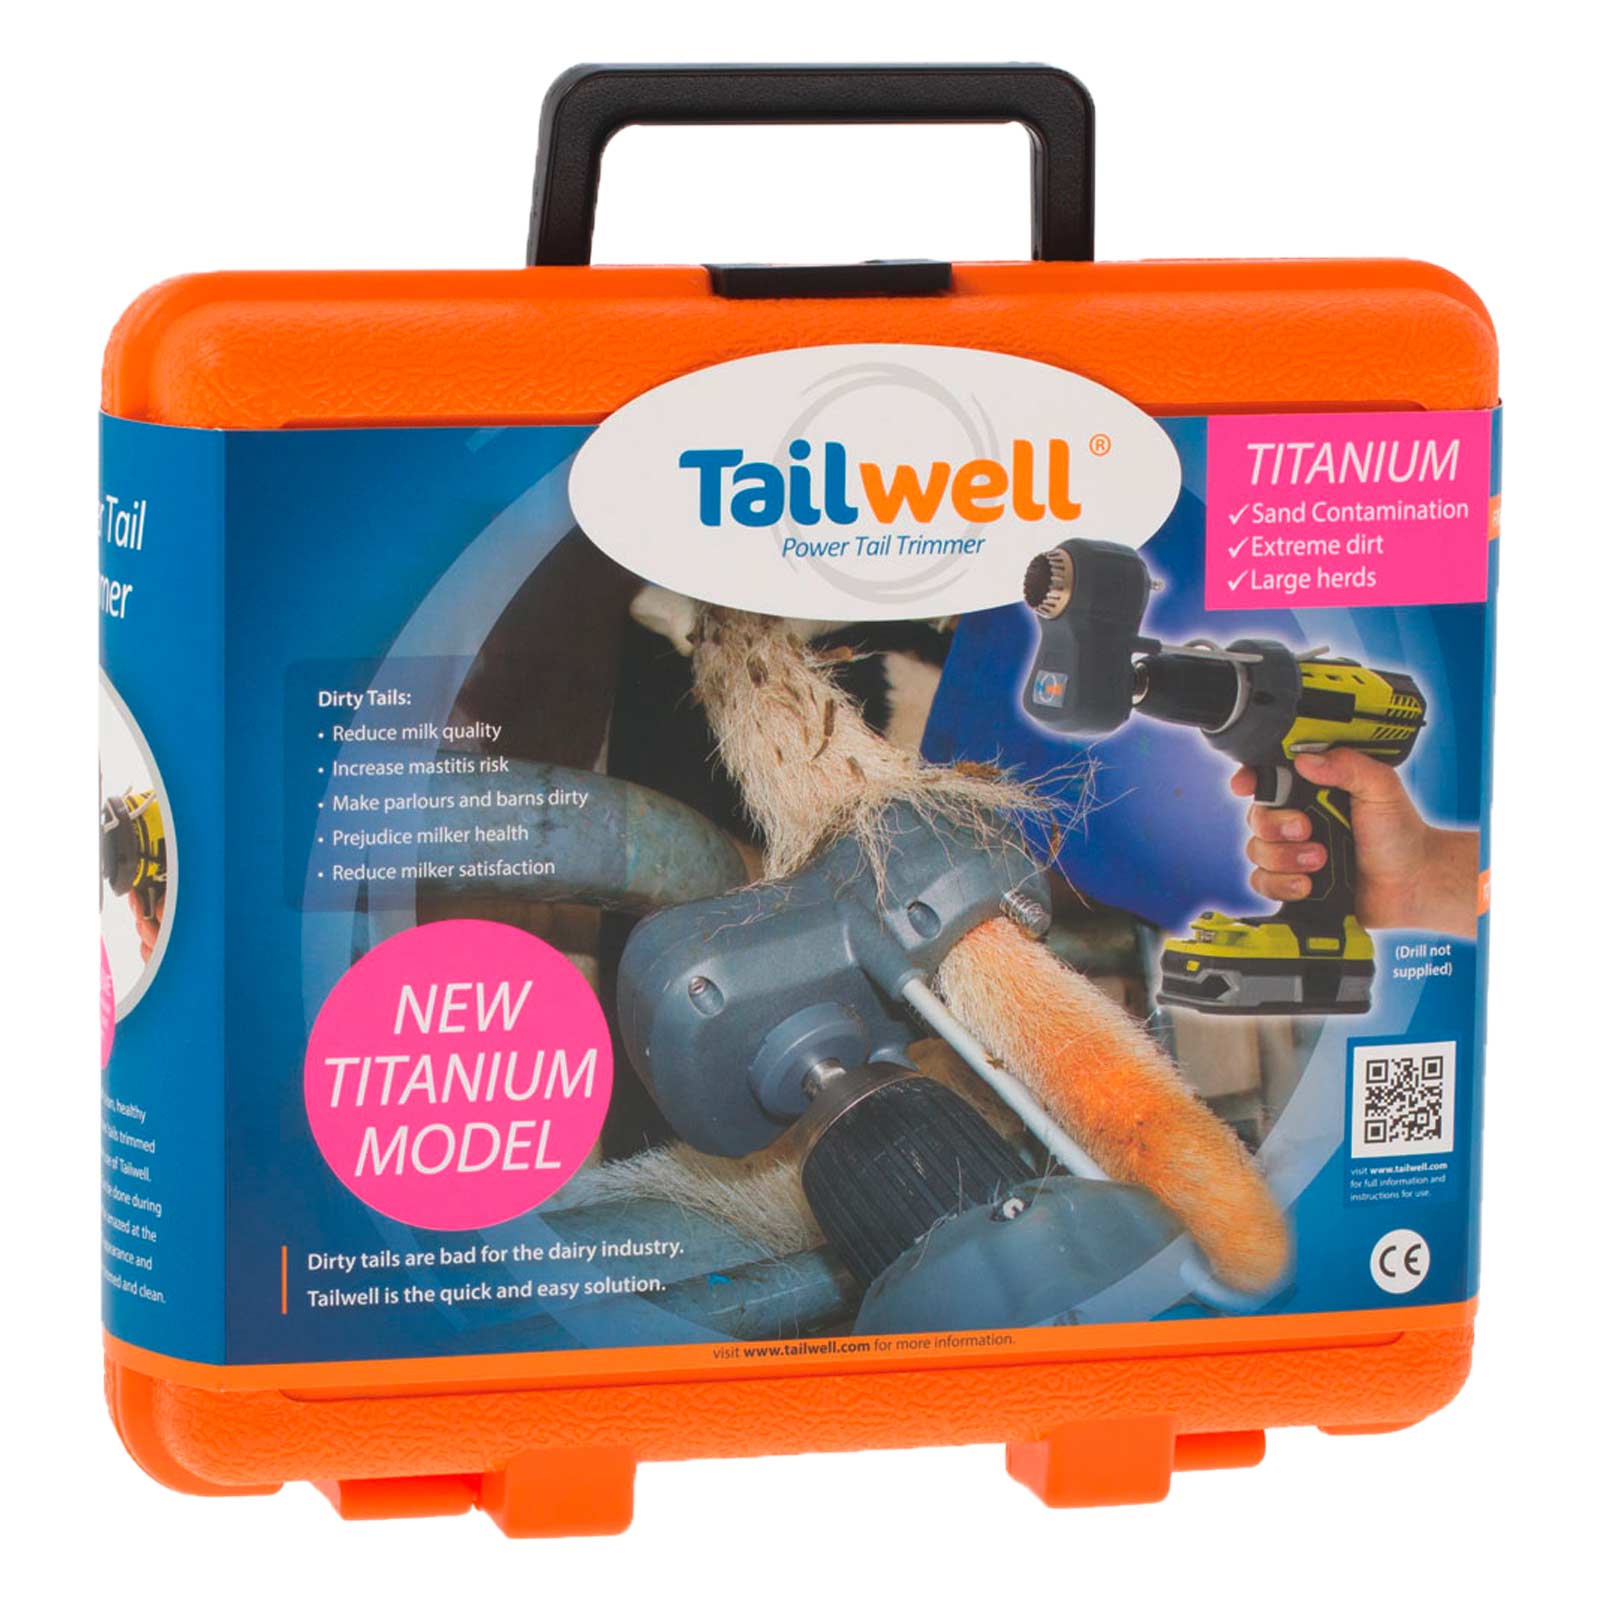 TailWell 2 Power Tail Trimmer Titanium